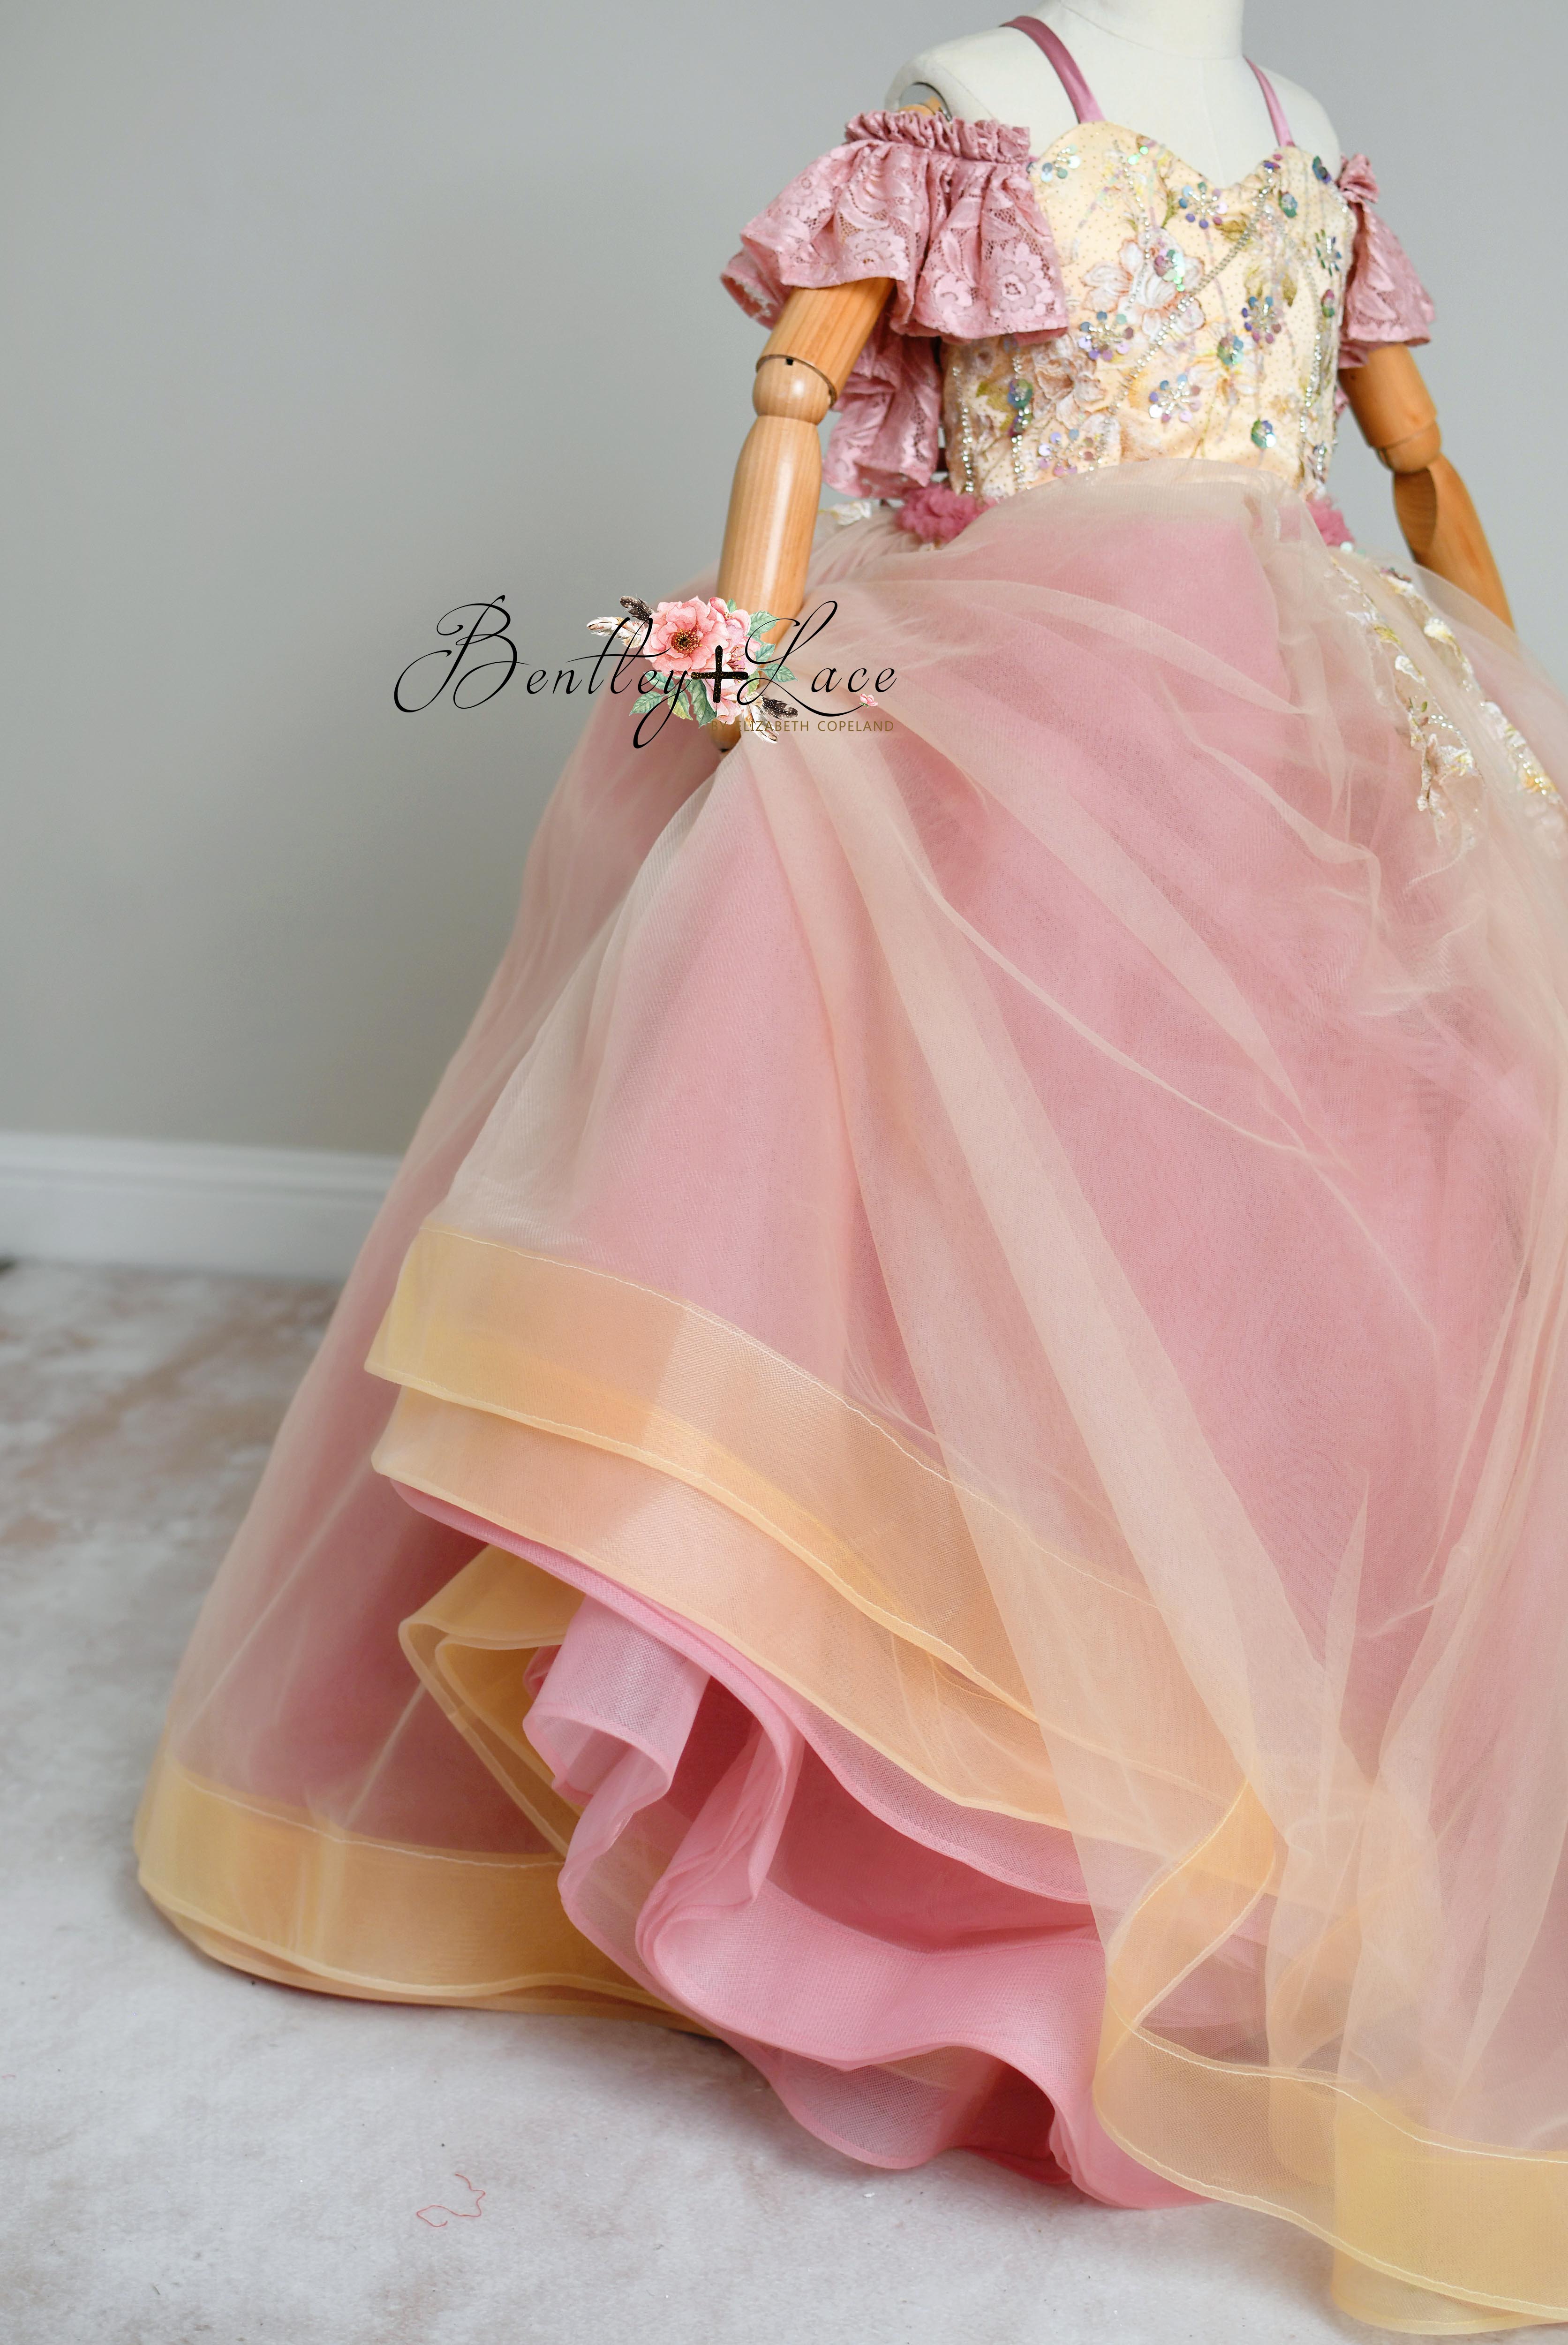 quality made children's gowns